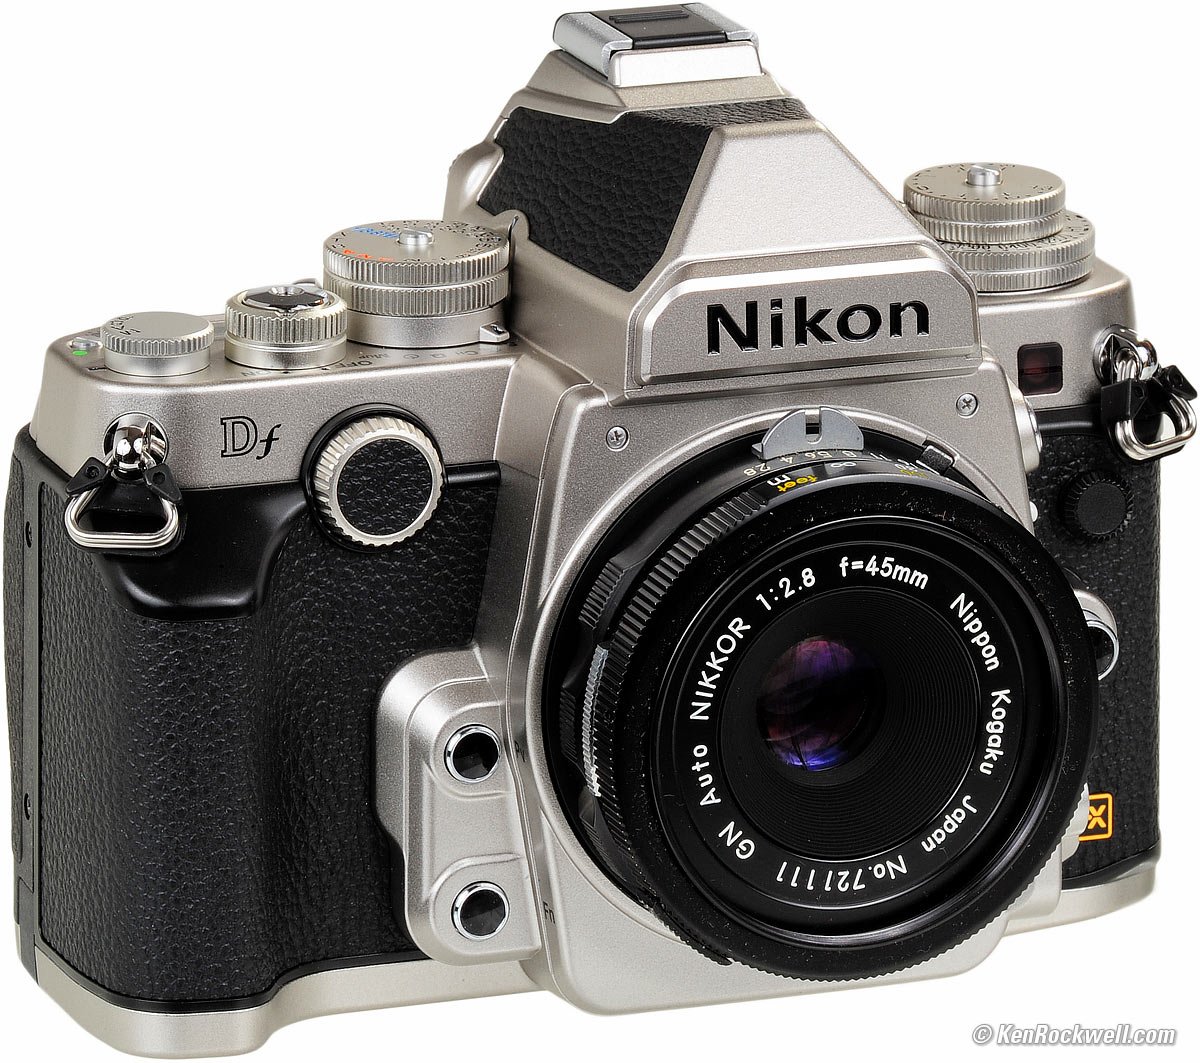 Nikon Zfc Review & Sample Images by Ken Rockwell